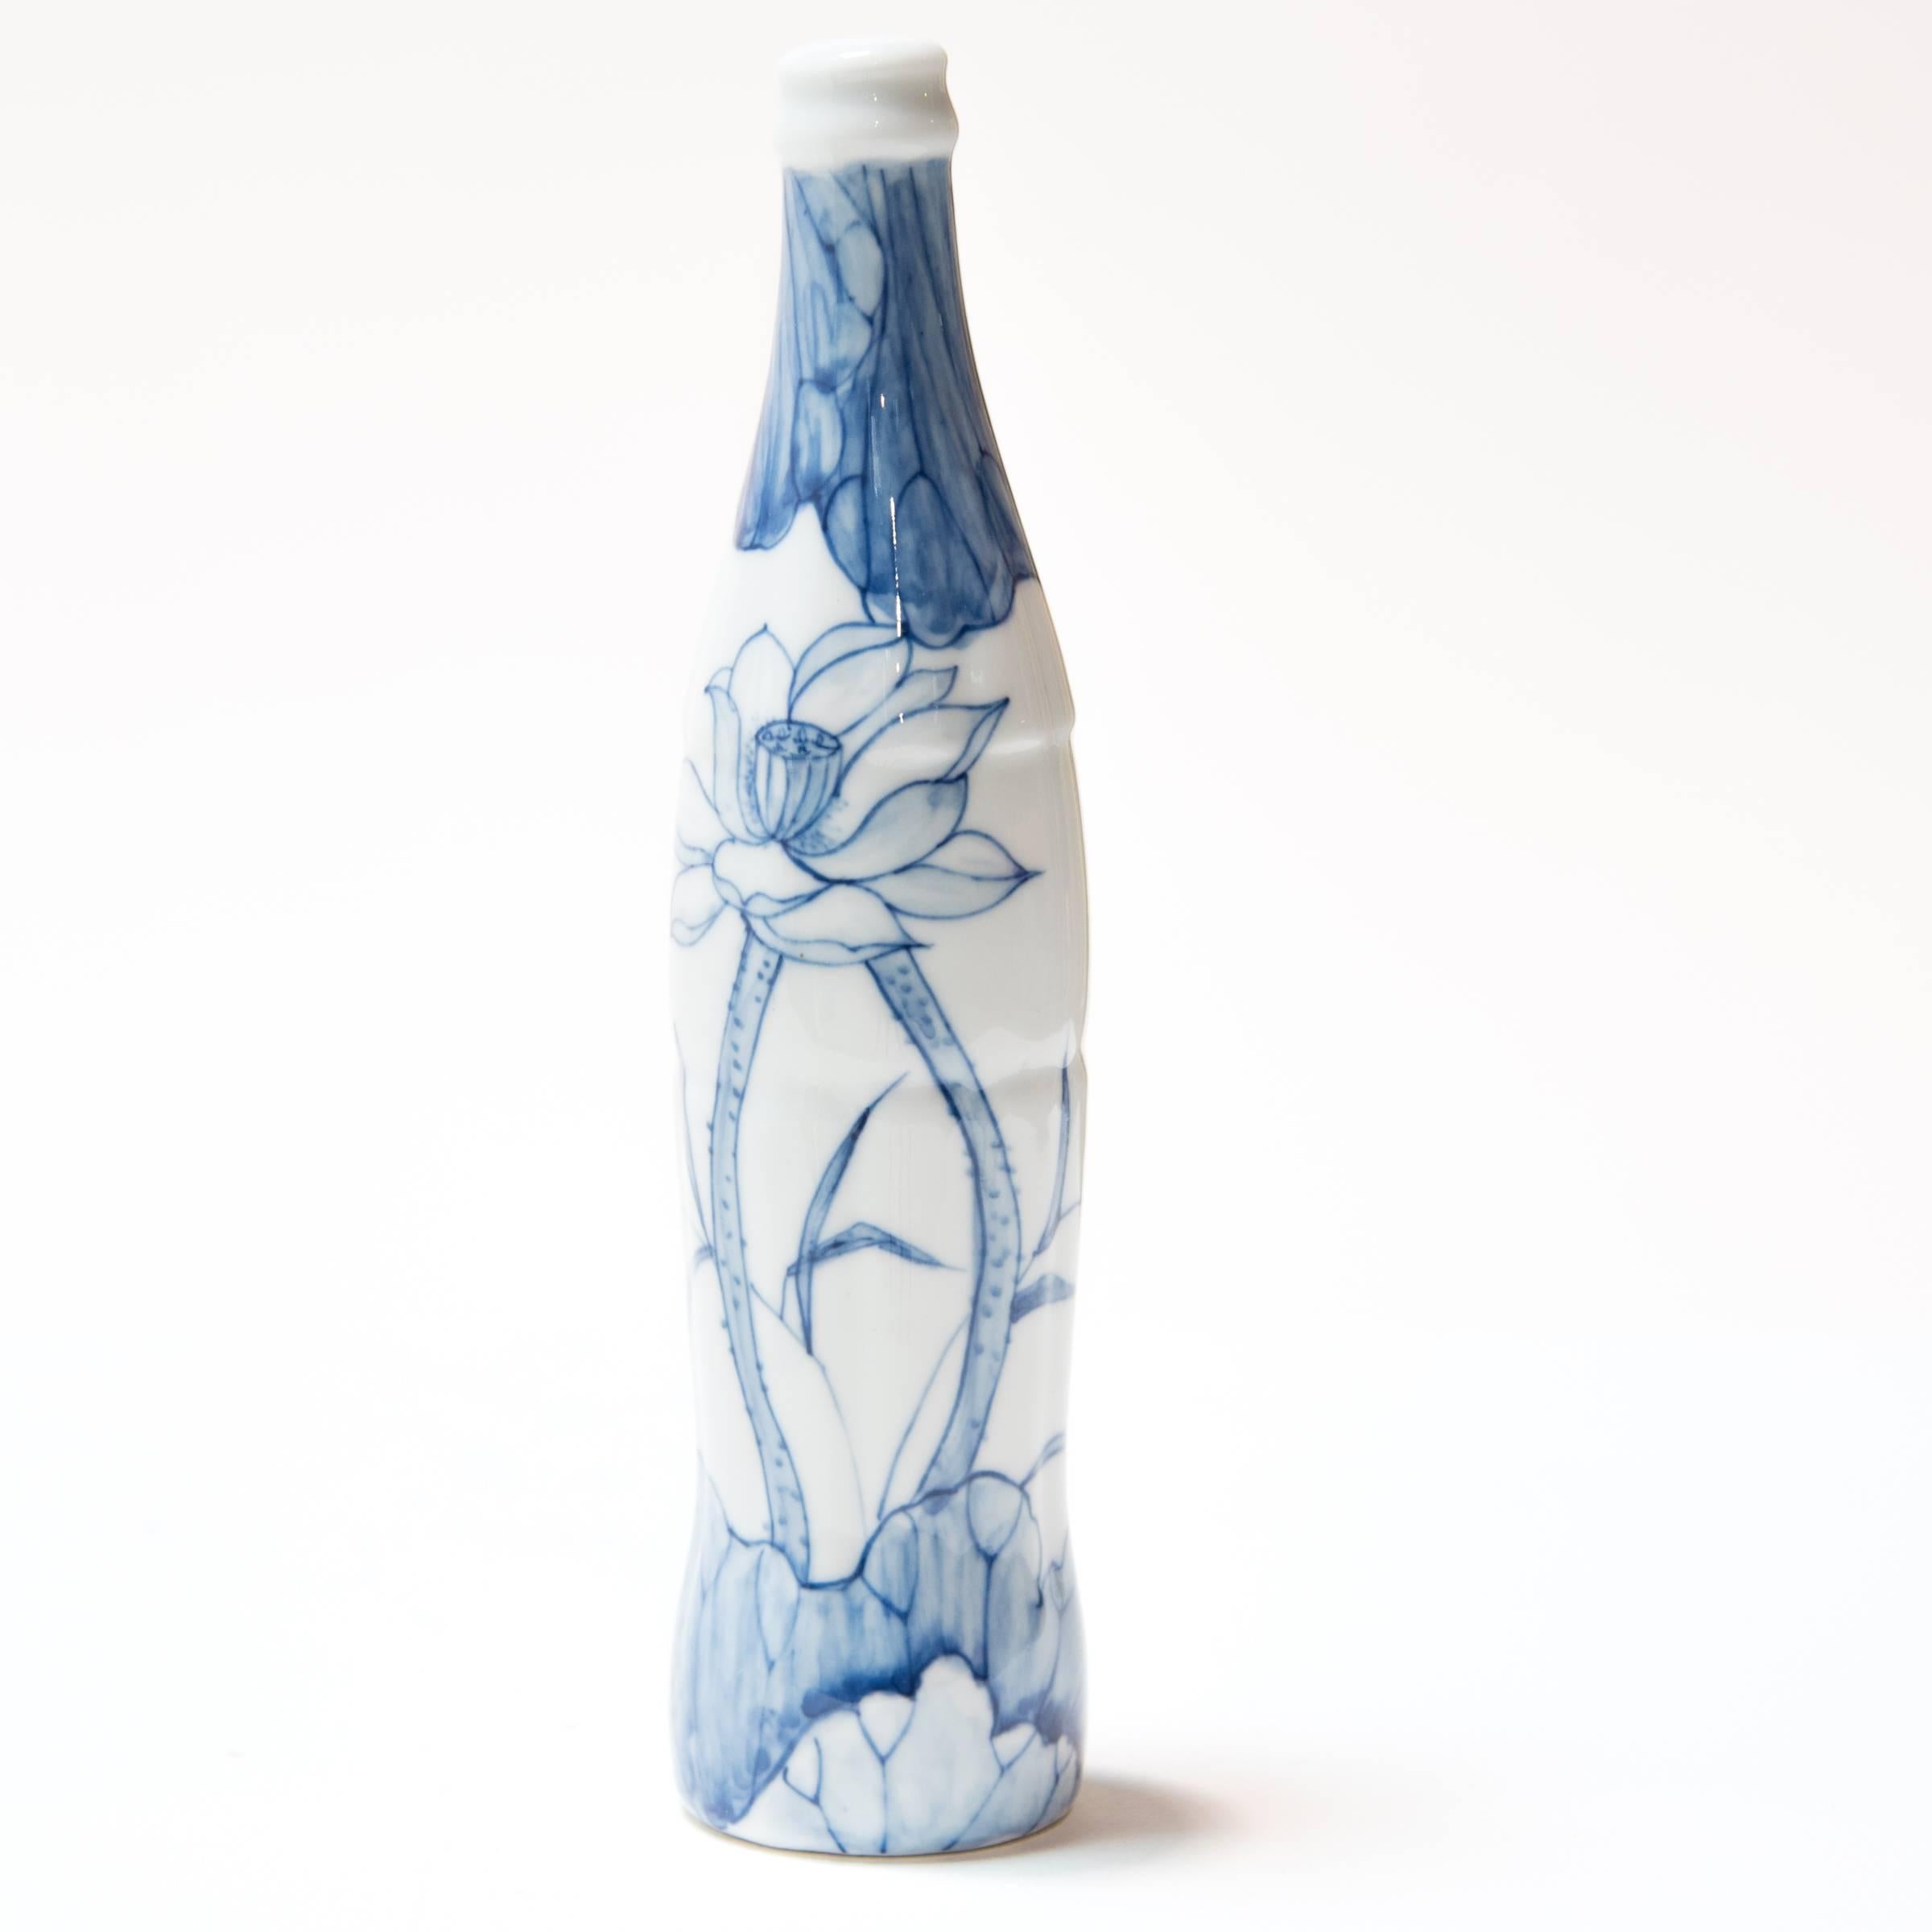 Contemporary artist Taikkun Li designed this delightful porcelain cola bottle. Painted with a scene reminiscent of the Ming Dynasty’s famous blue and white ceramics, this bottle deftly combines old and new, East and West. Taikkun Li's work blurs the